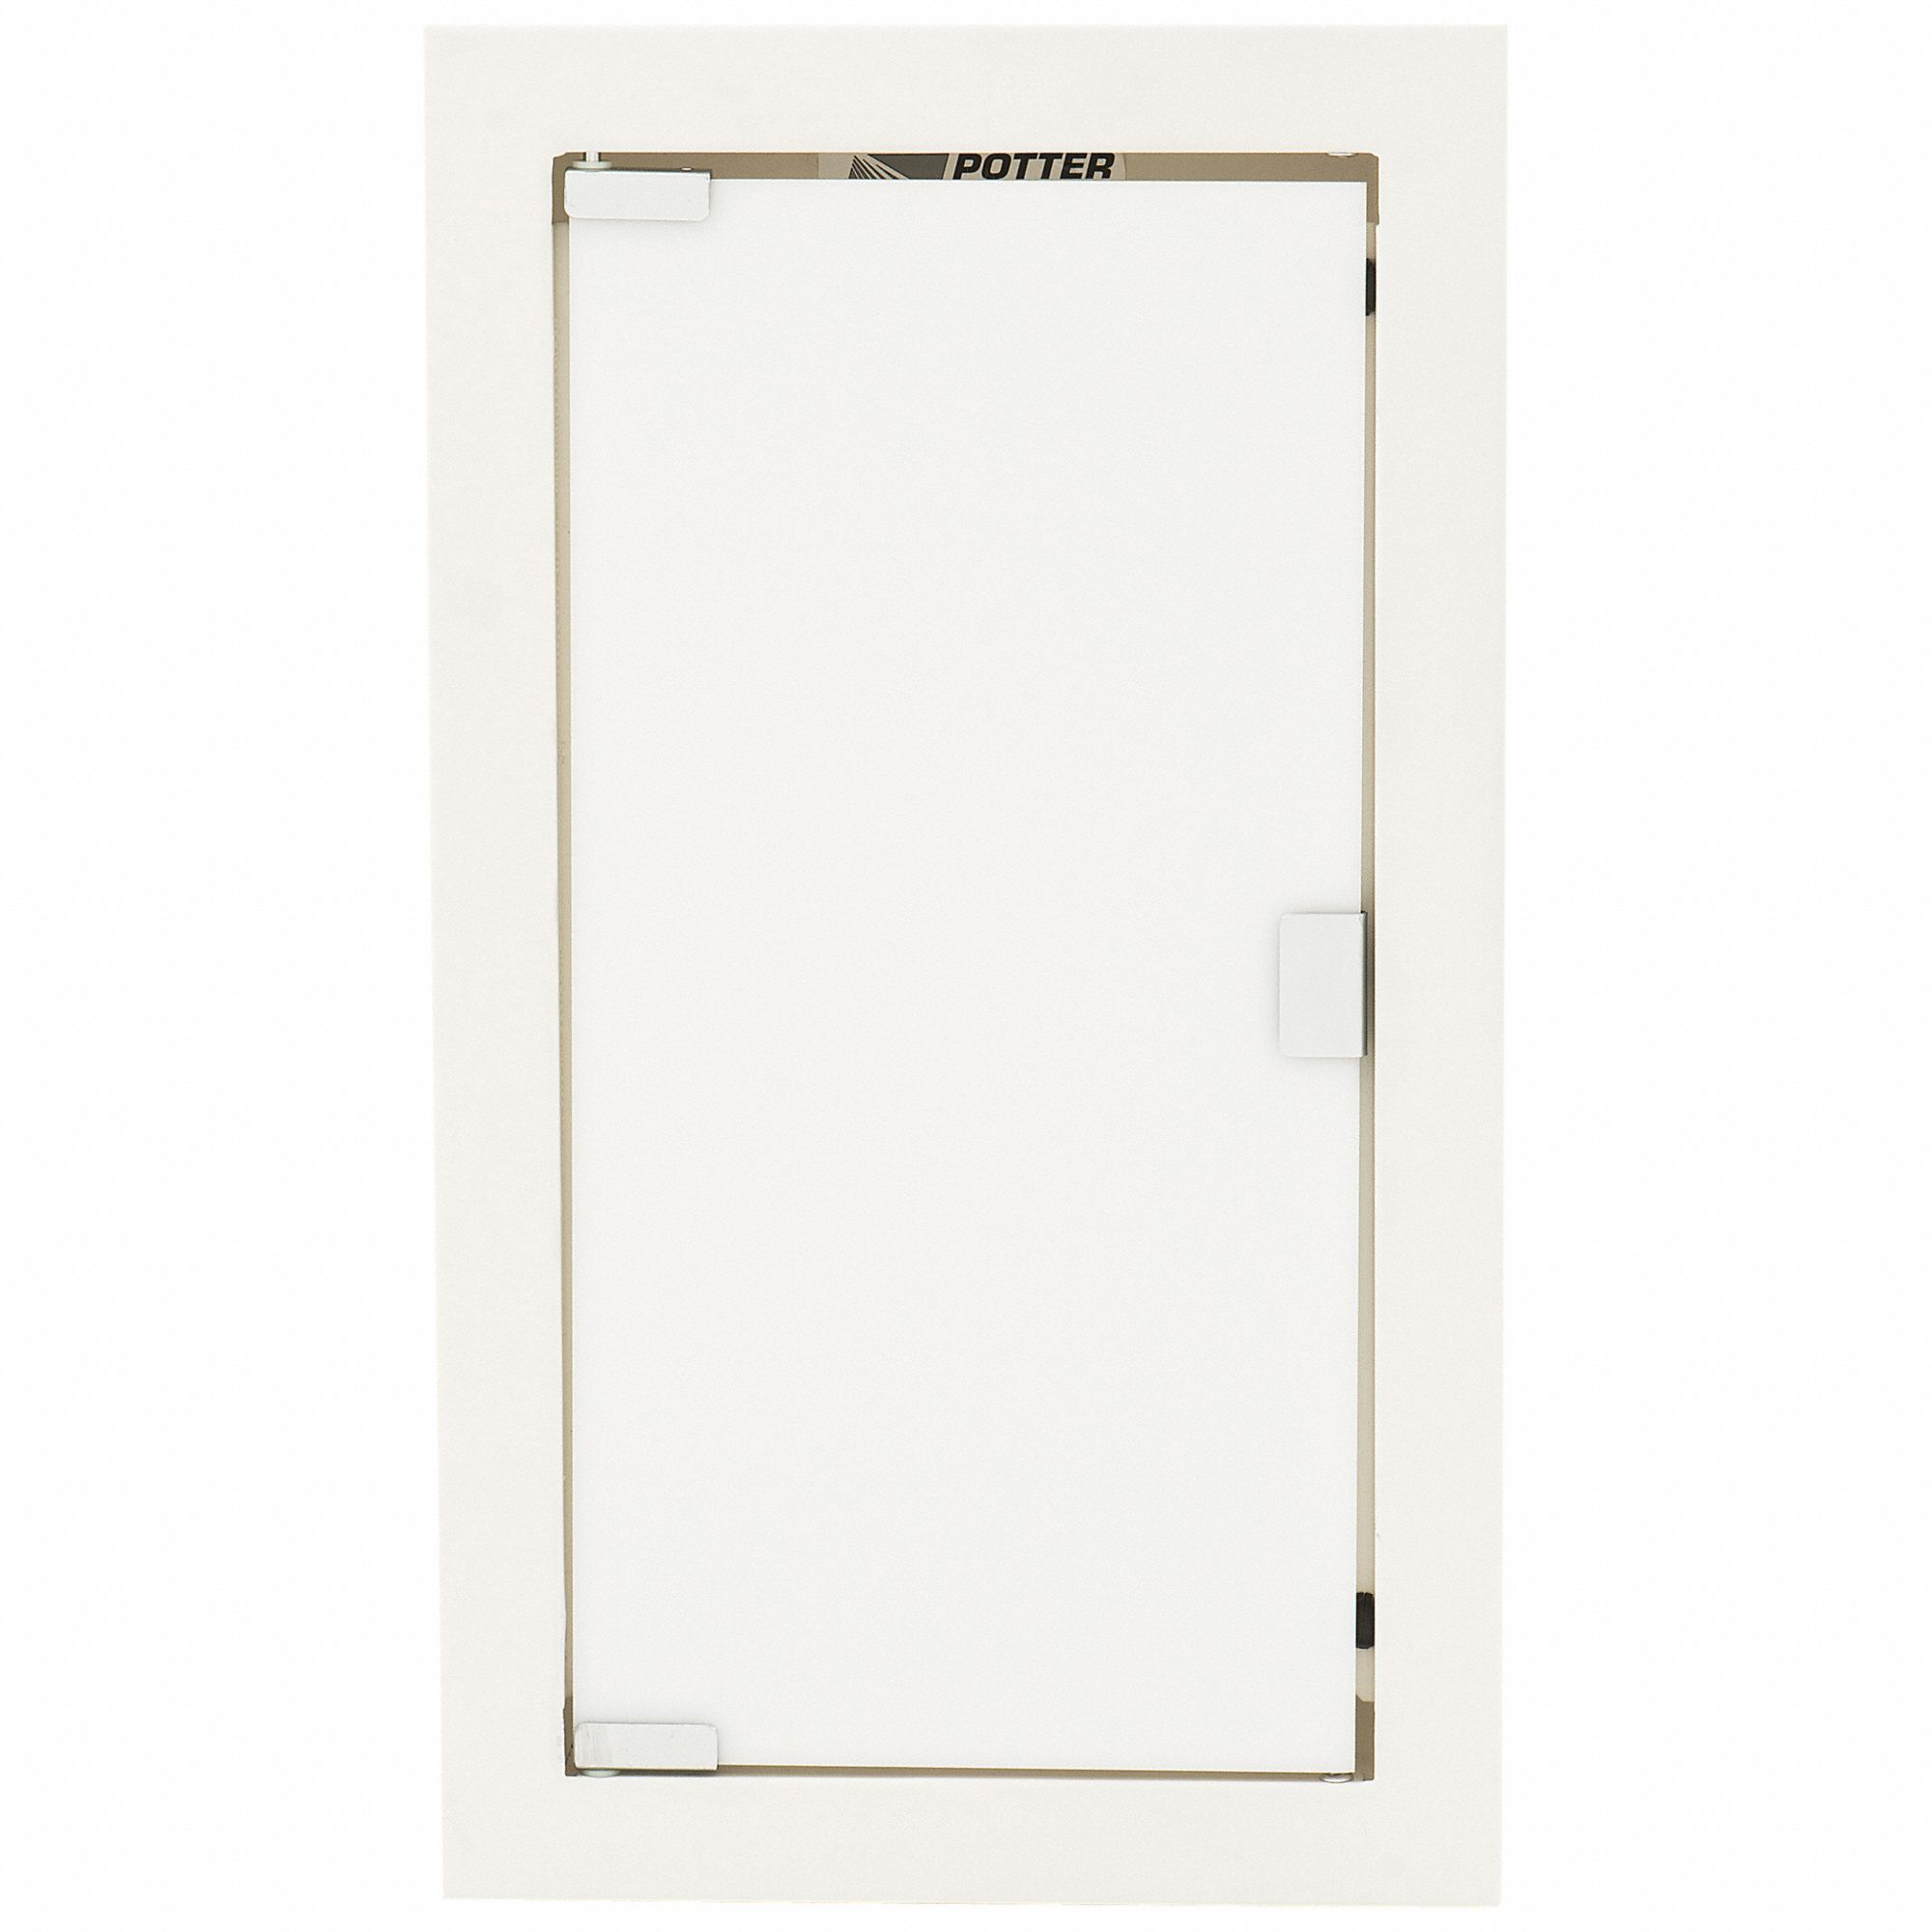 Fire Extinguisher Cabinet: Semi Recessed Mounting, 5 lb Capacity, Cold Rolled Steel, Acrylic